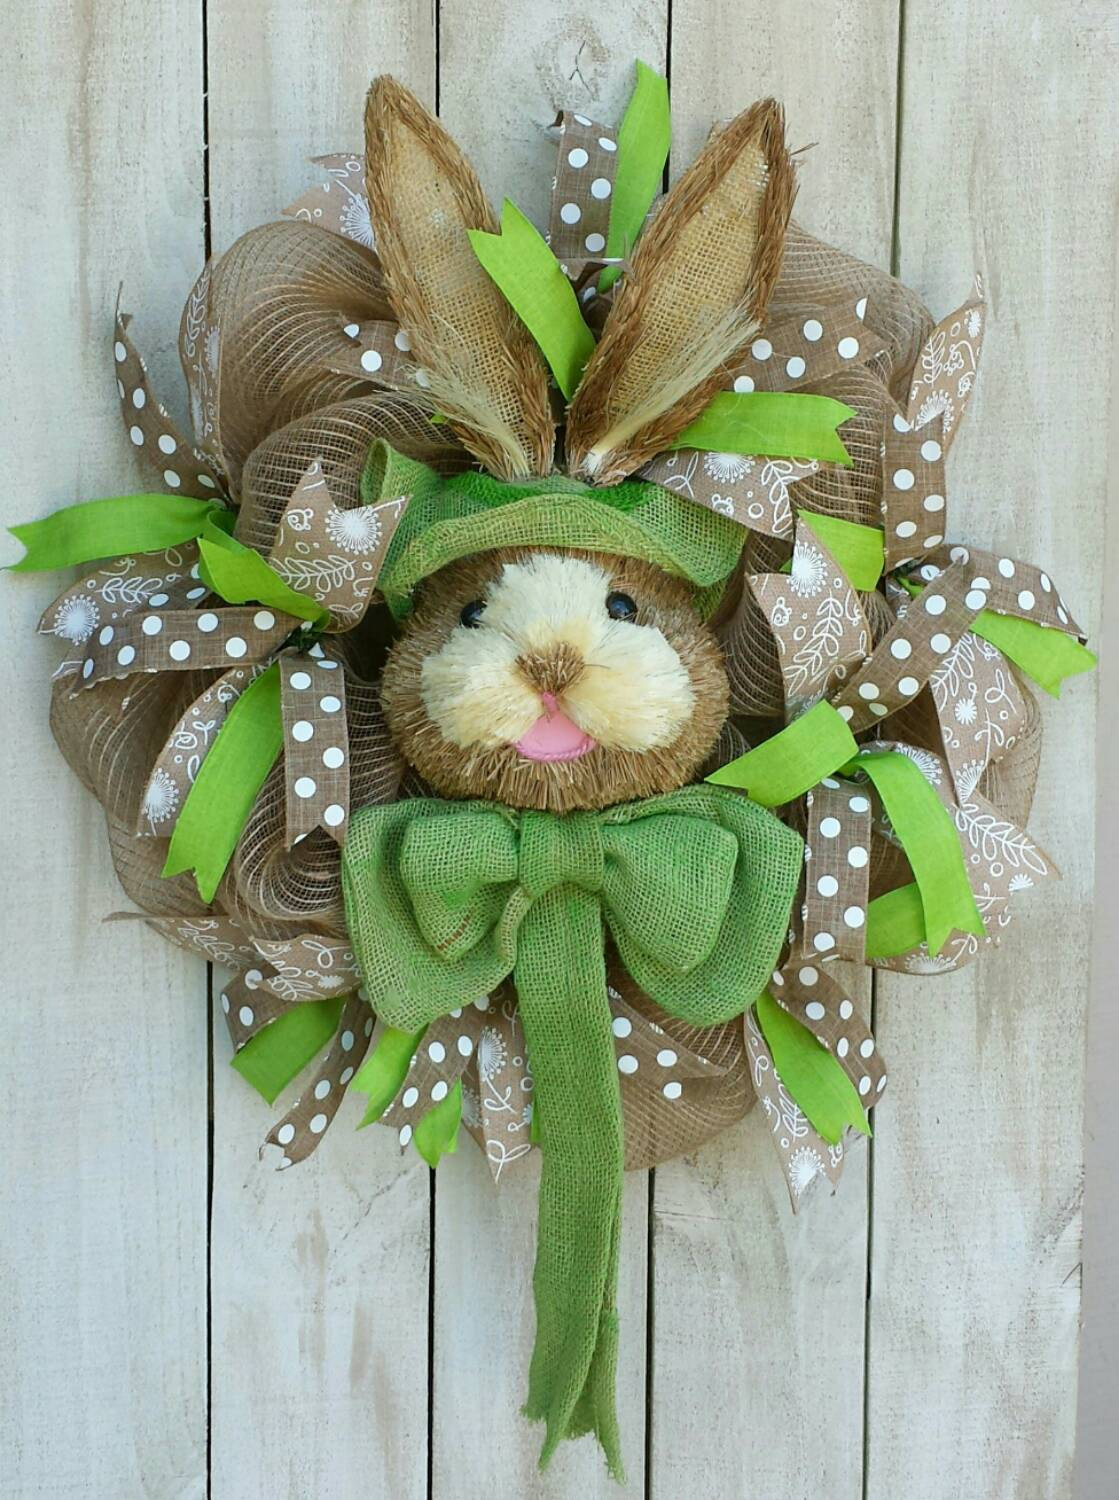 15 Charming Handmade Easter Wreath Designs For The Upcoming Holiday